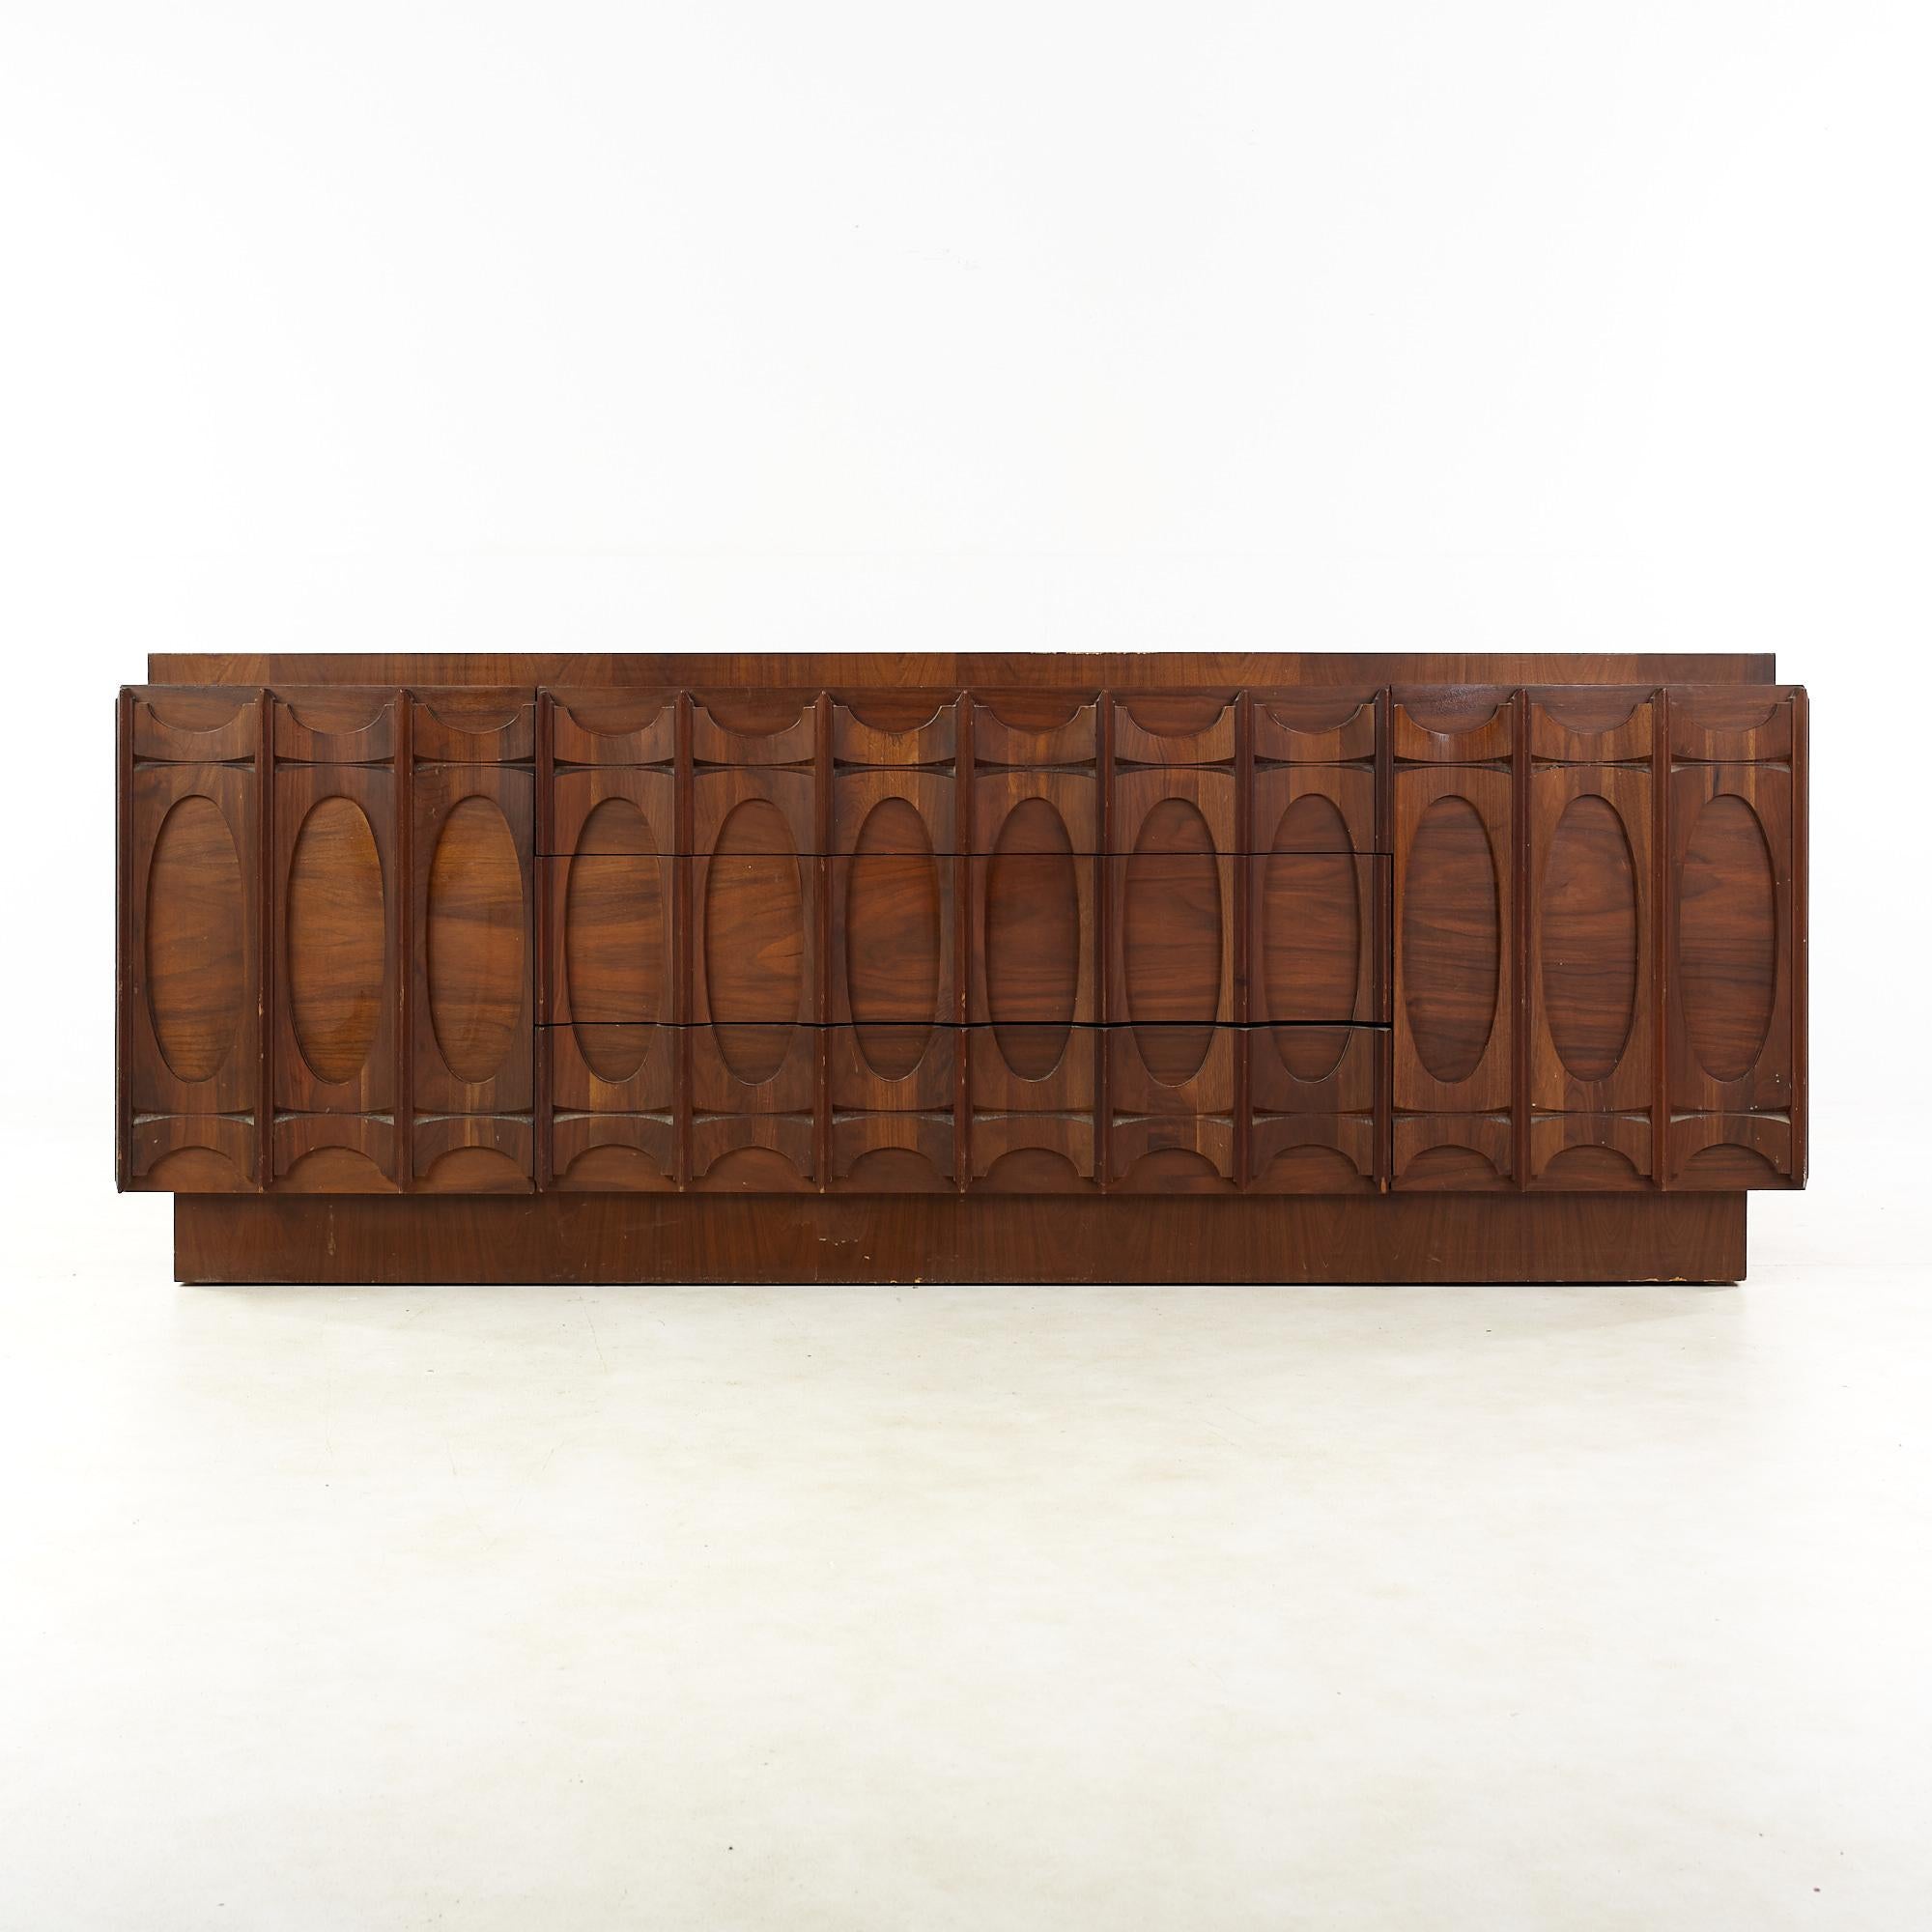 Tobago Brutalist mid-century walnut 9 drawer lowboy dresser.

This dresser measures: 81 wide x 22 deep x 30 inches high.

All pieces of furniture can be had in what we call restored vintage condition. That means the piece is restored upon